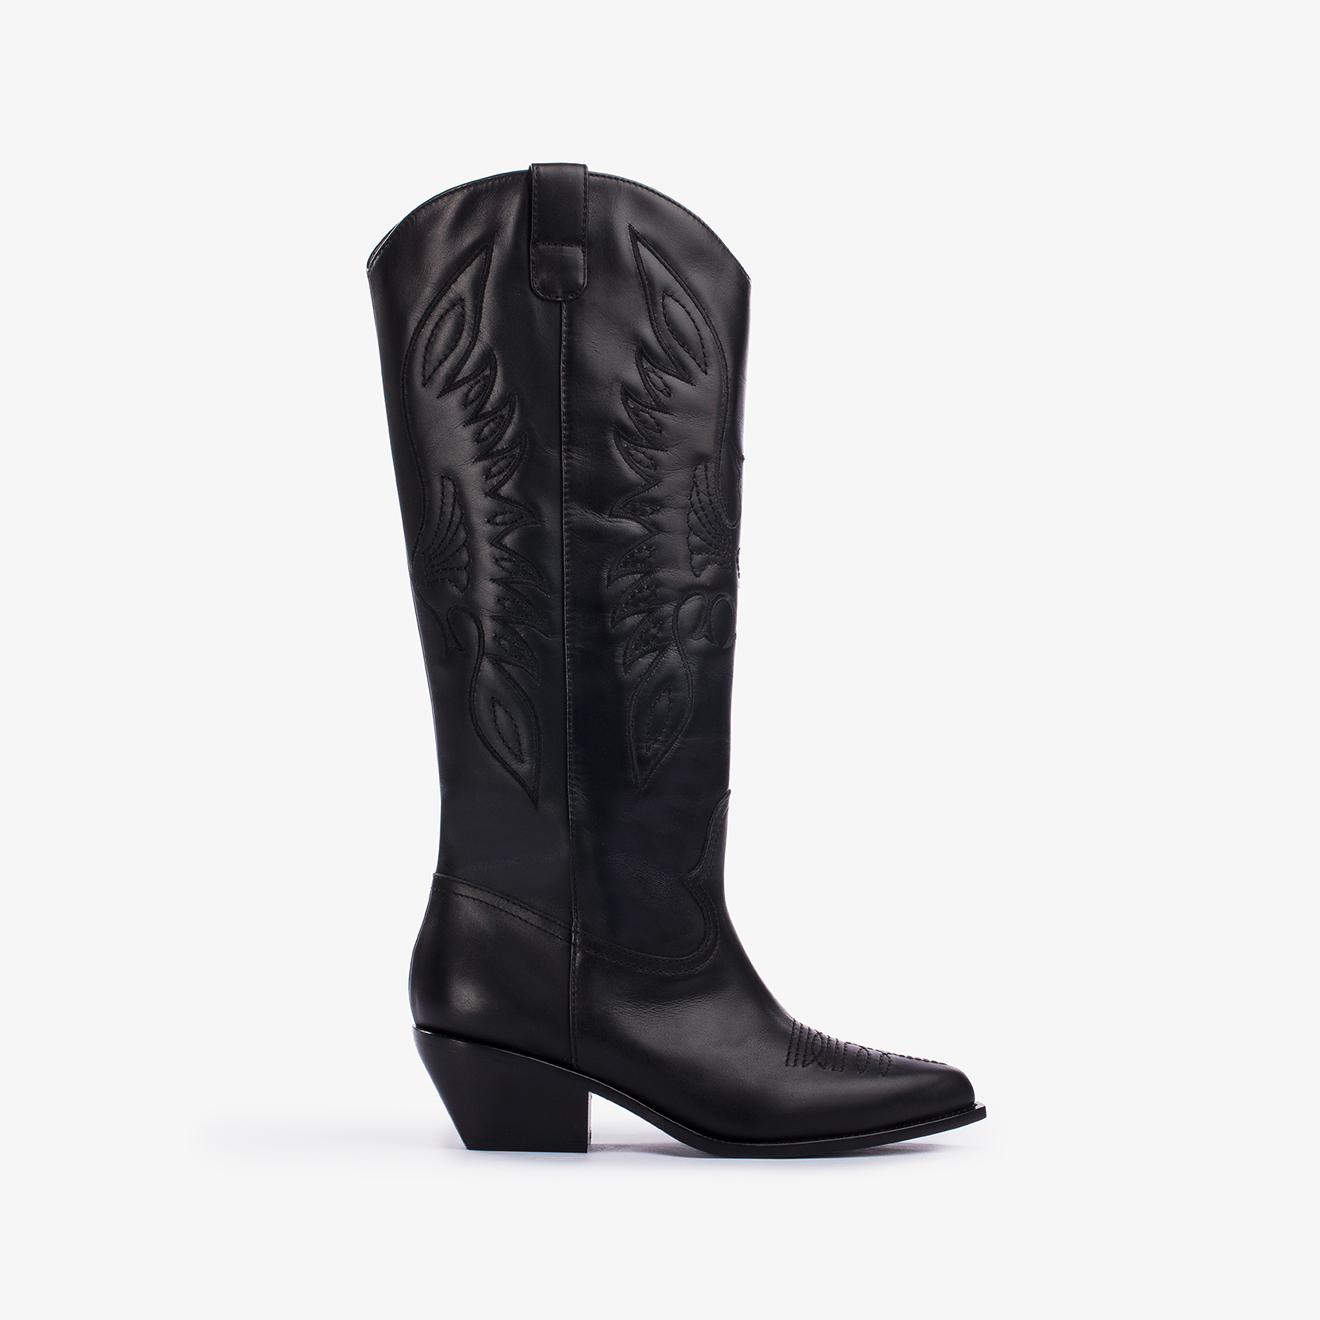 CHRISTINE BOOT 70 mm - Le Silla official outlet